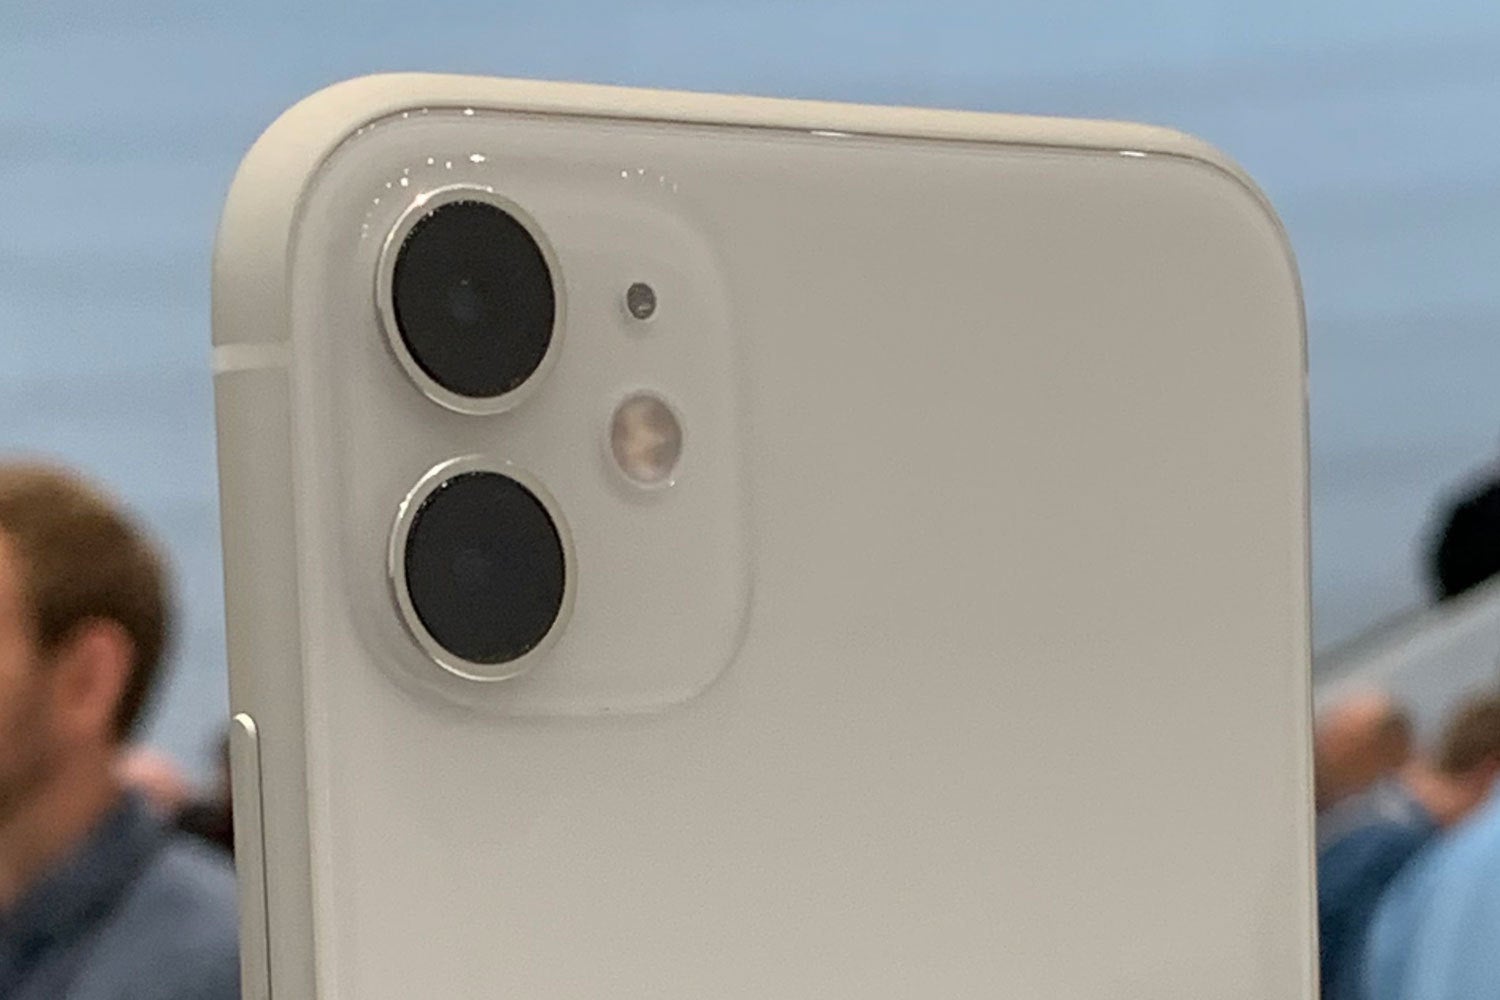 Hands on with the iPhone 11 cameras